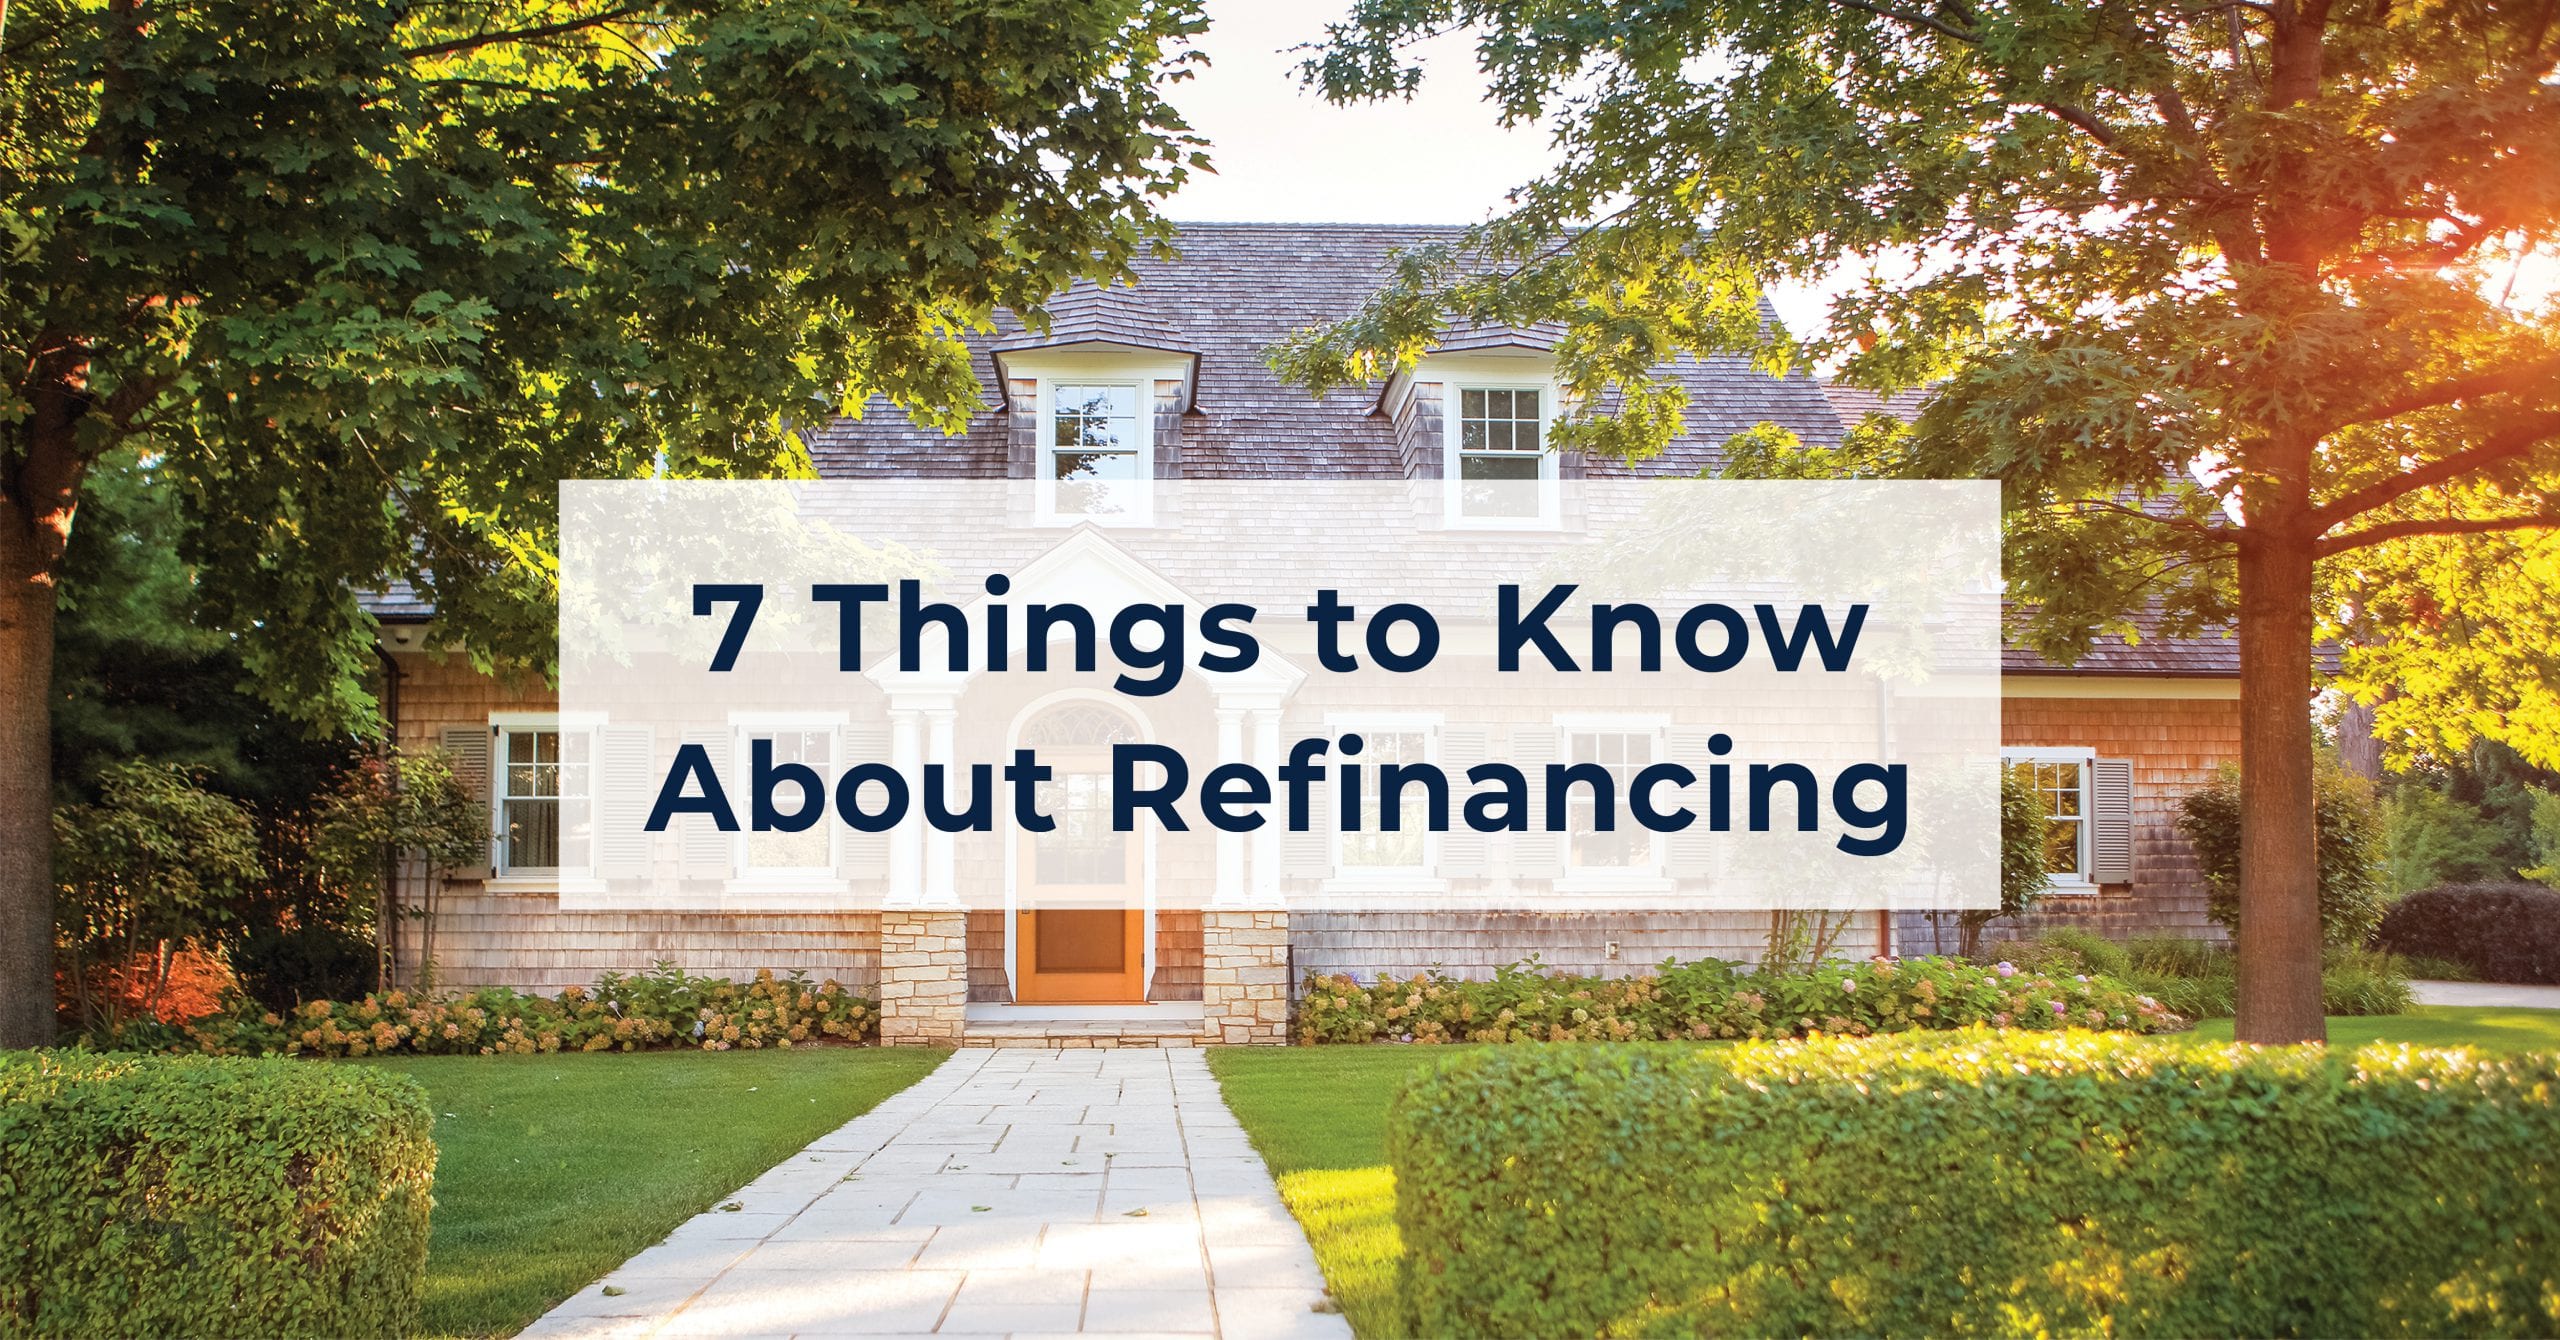 7 Things to Know About Refinancing